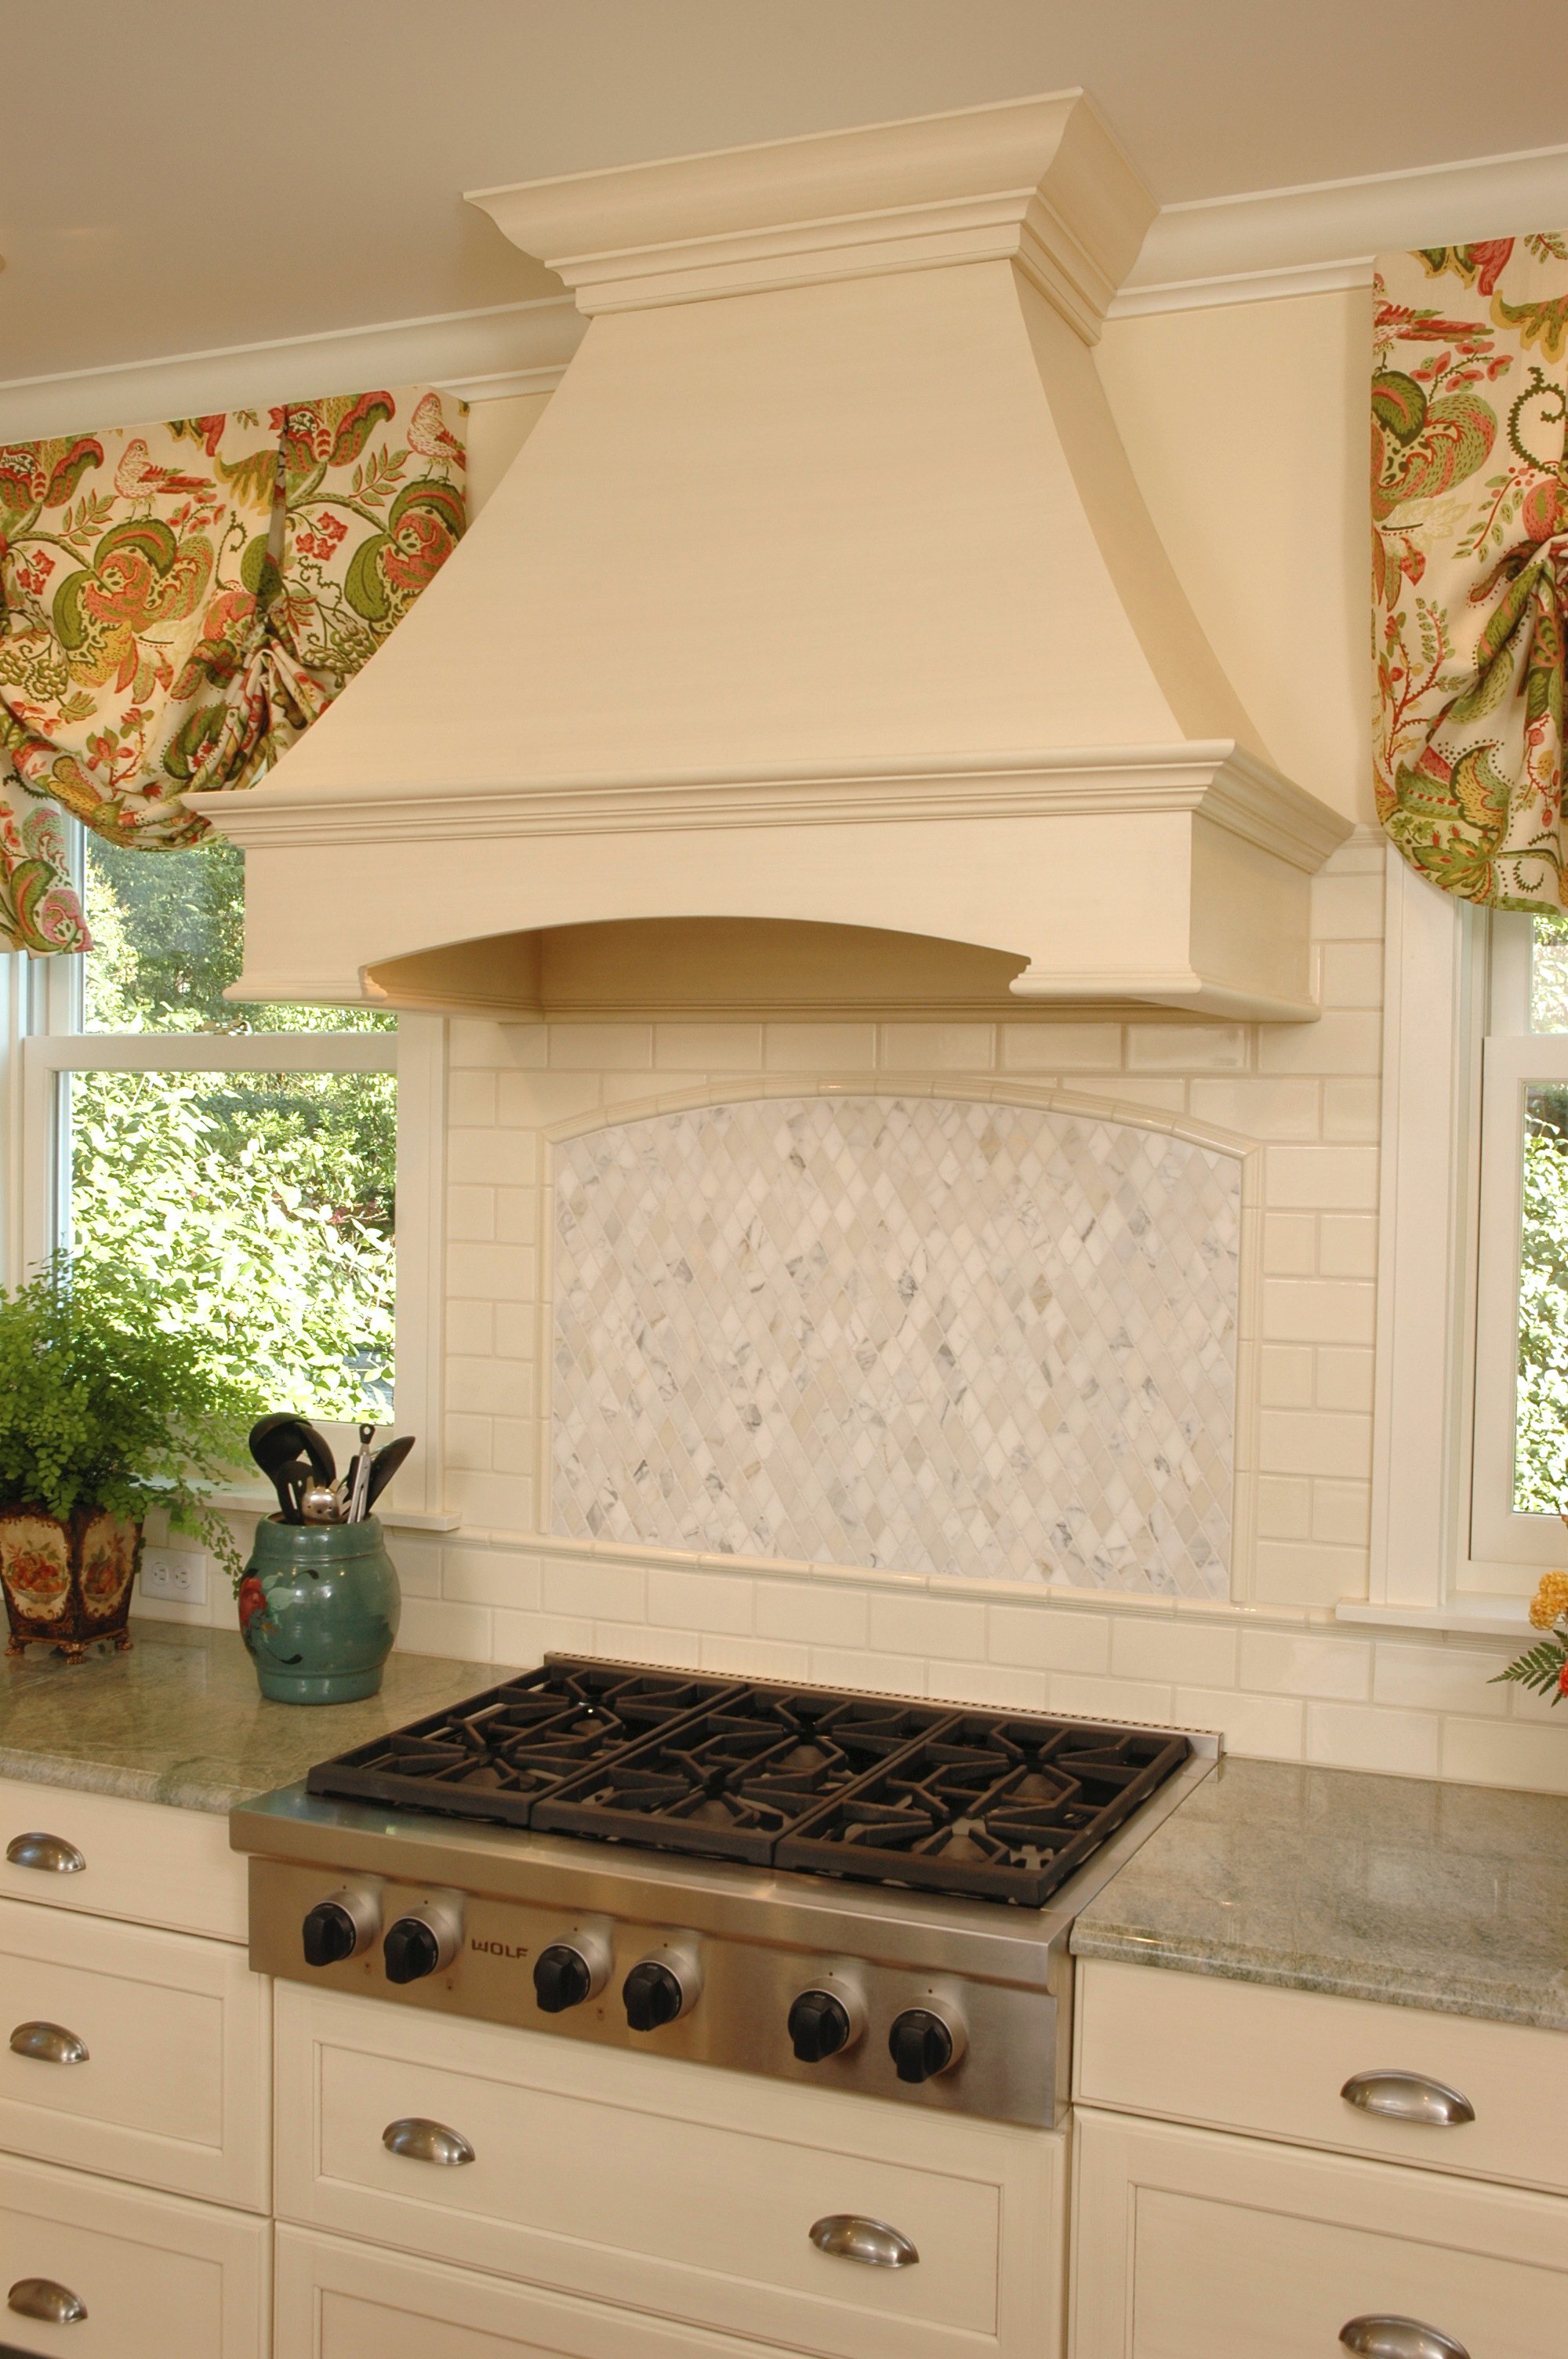 A chimney wood hood like this one can be customized to fit the style and cabinets of your kitchen.